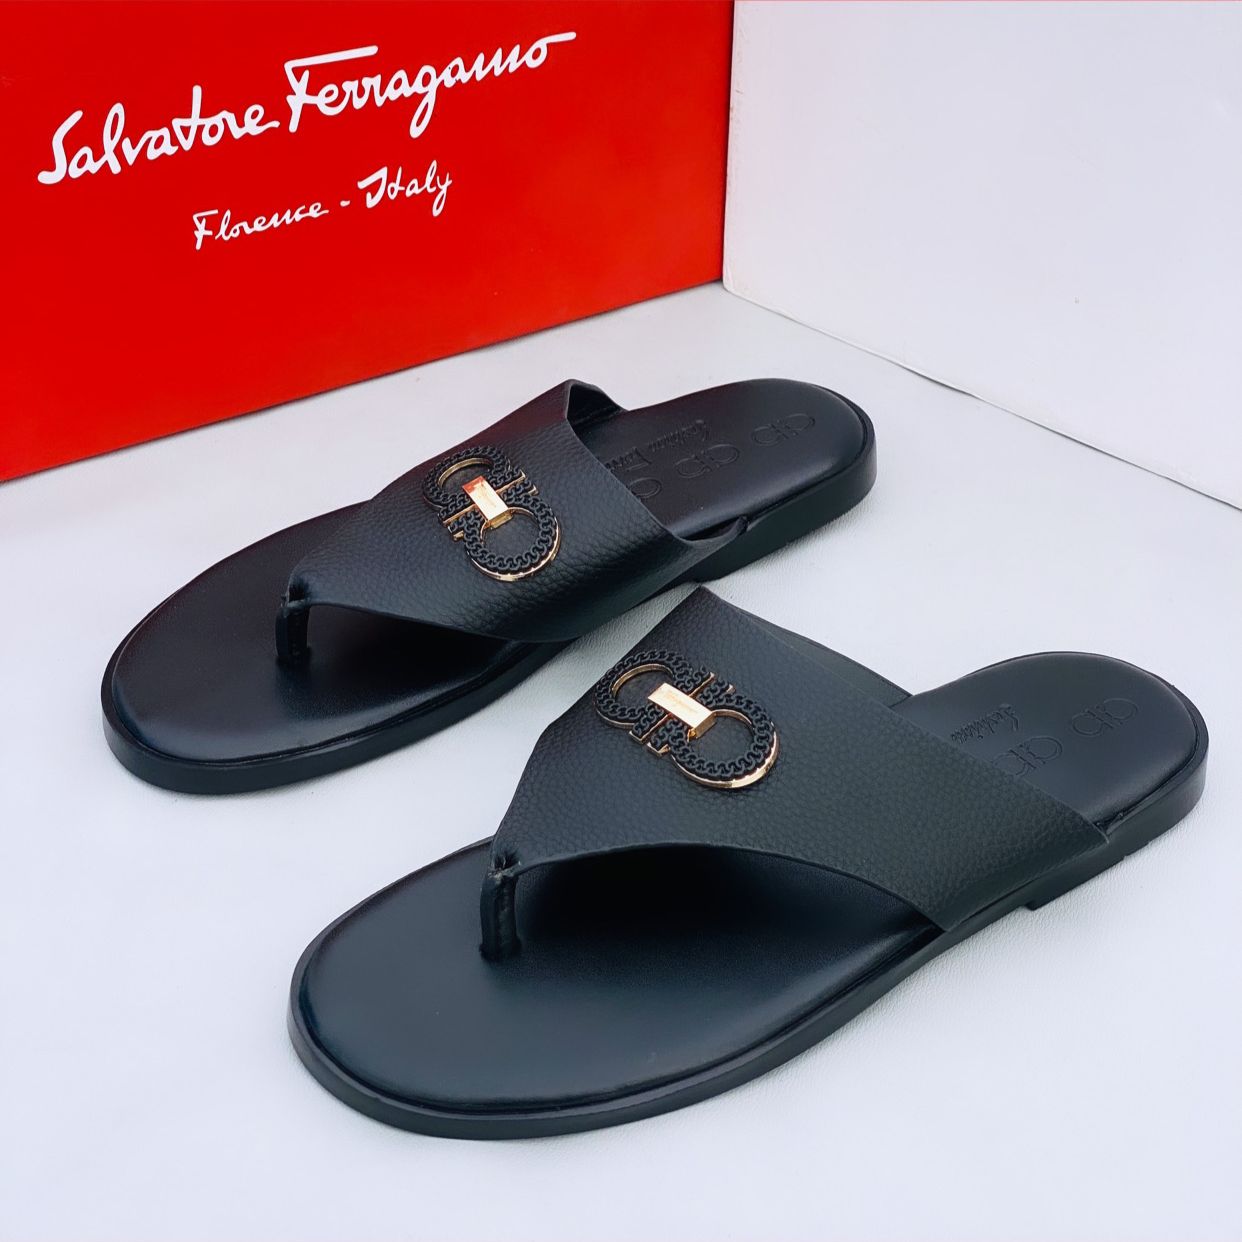 Executive Black Leather Slides | Buy Online At The Best Price In Accra